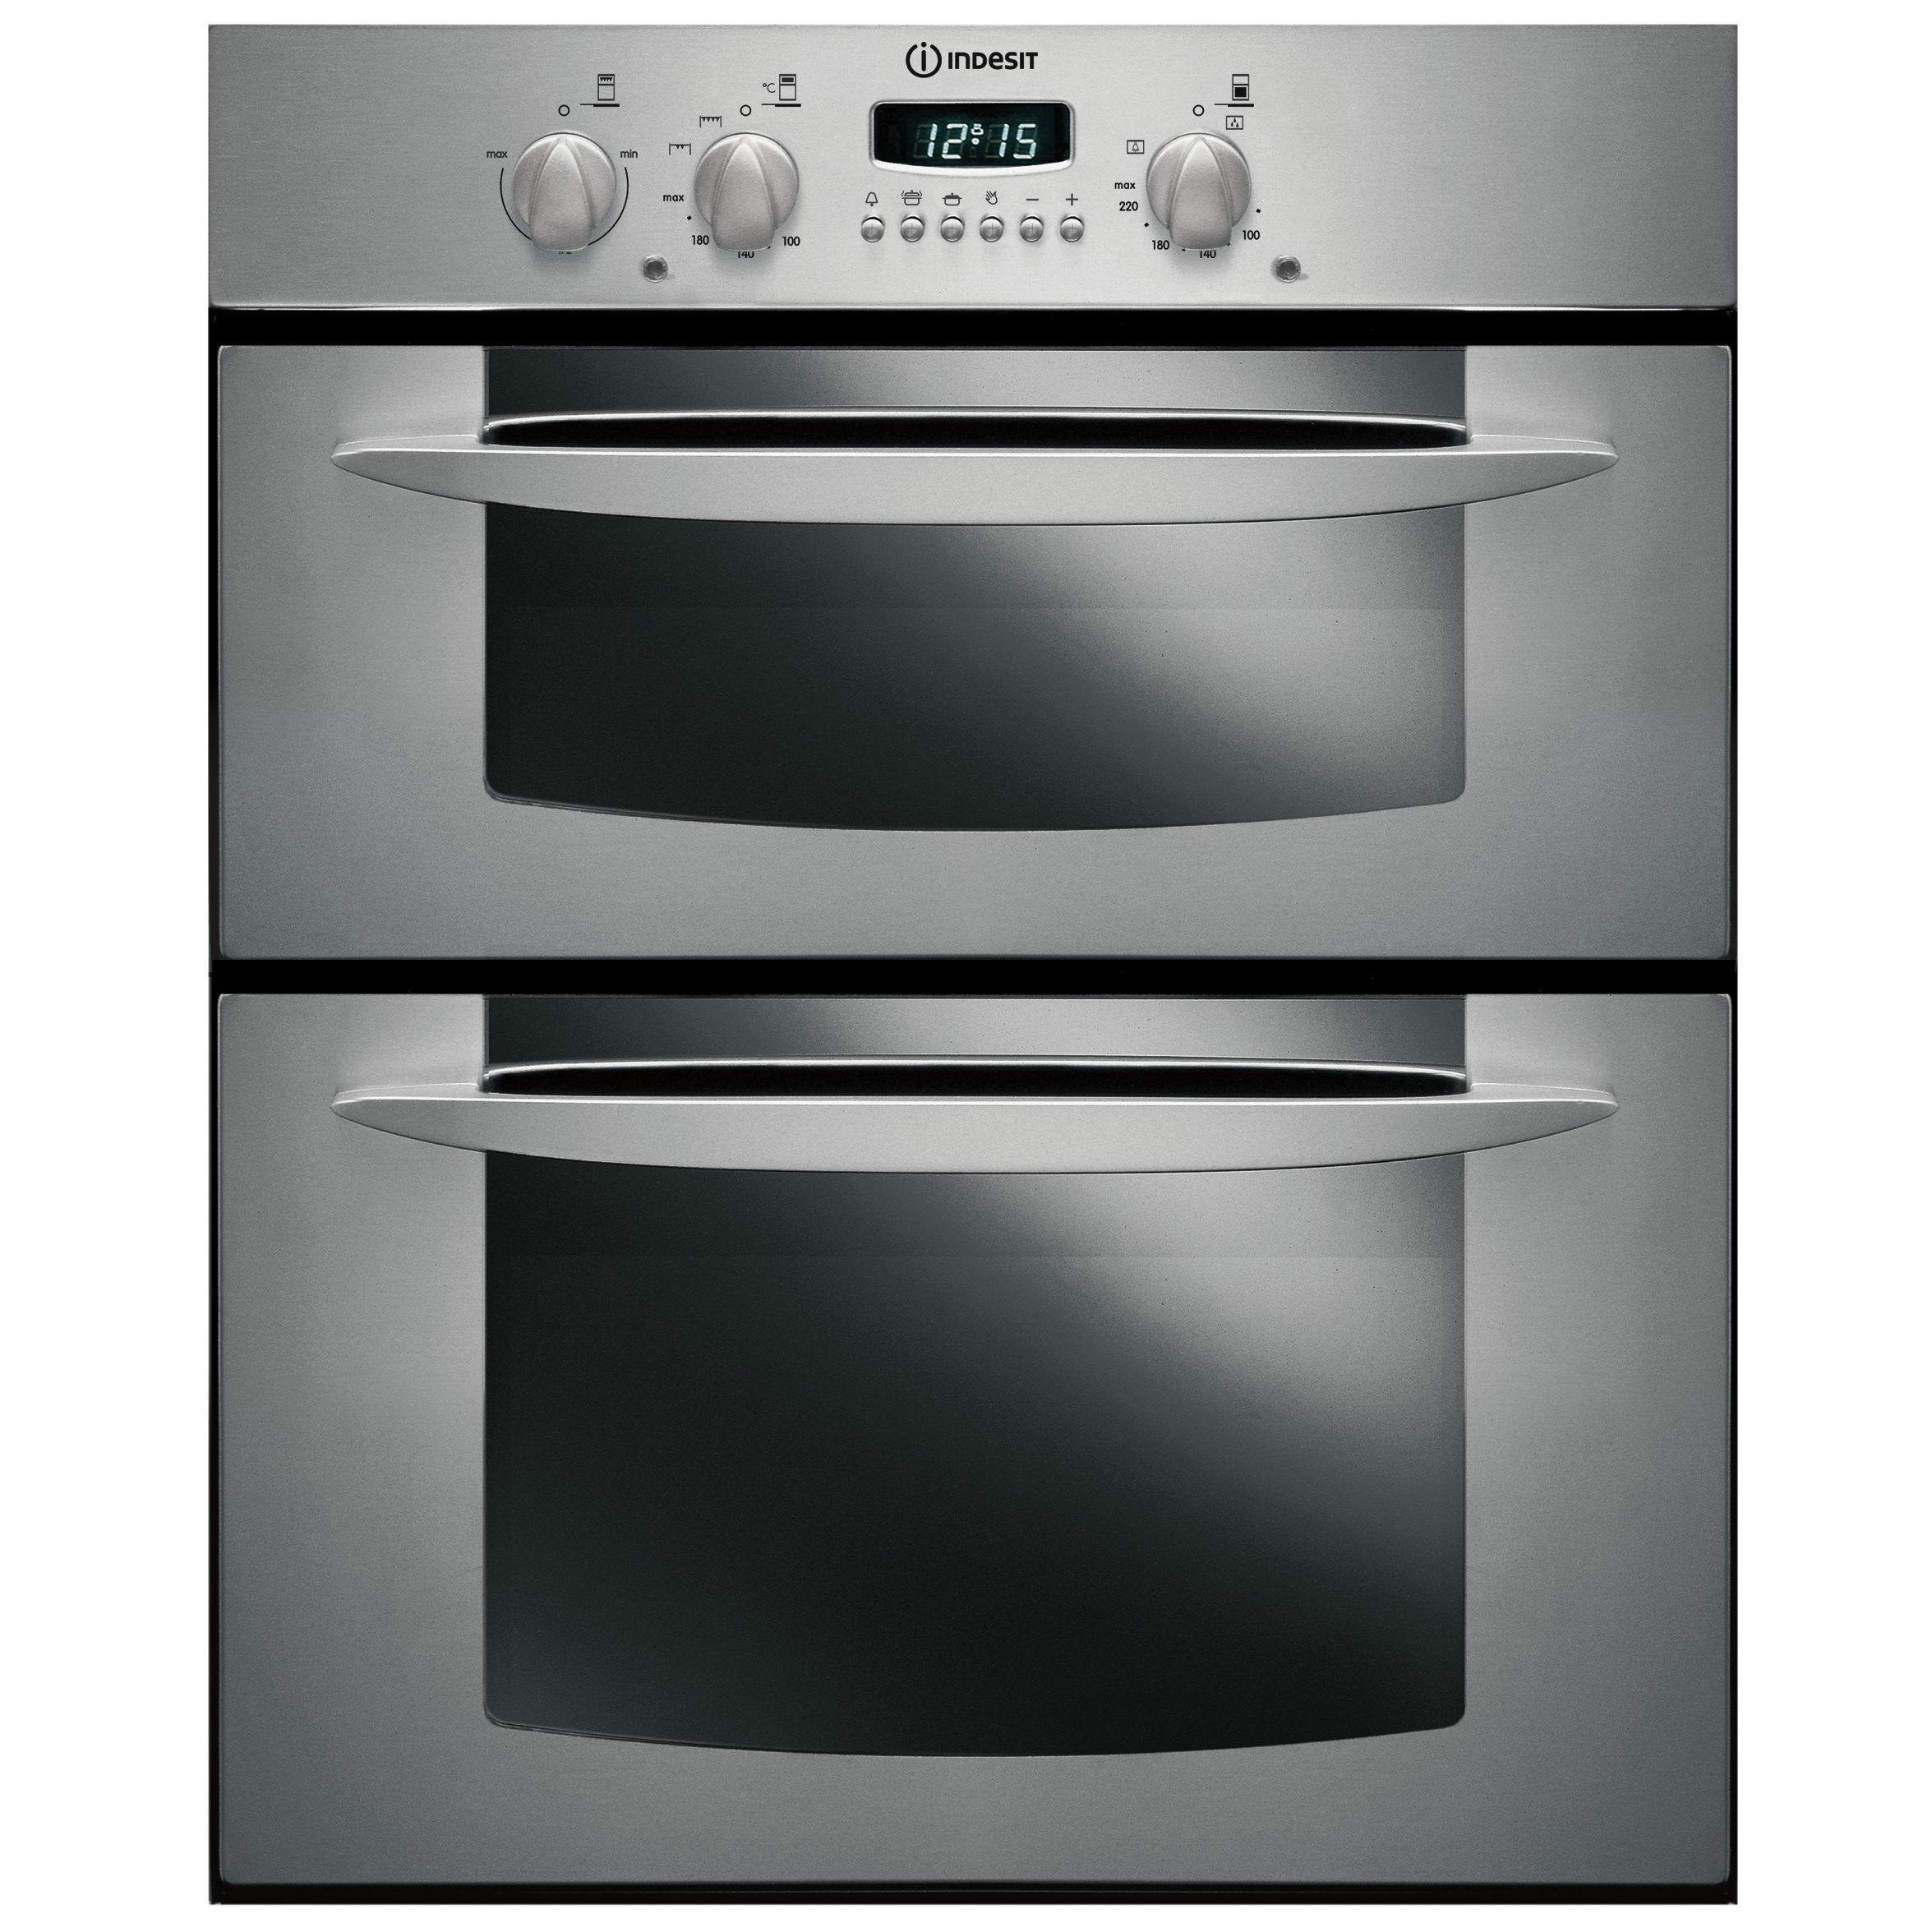 Indesit FIU20IX Built-Under Double Electric Oven, Stainless Steel at John Lewis